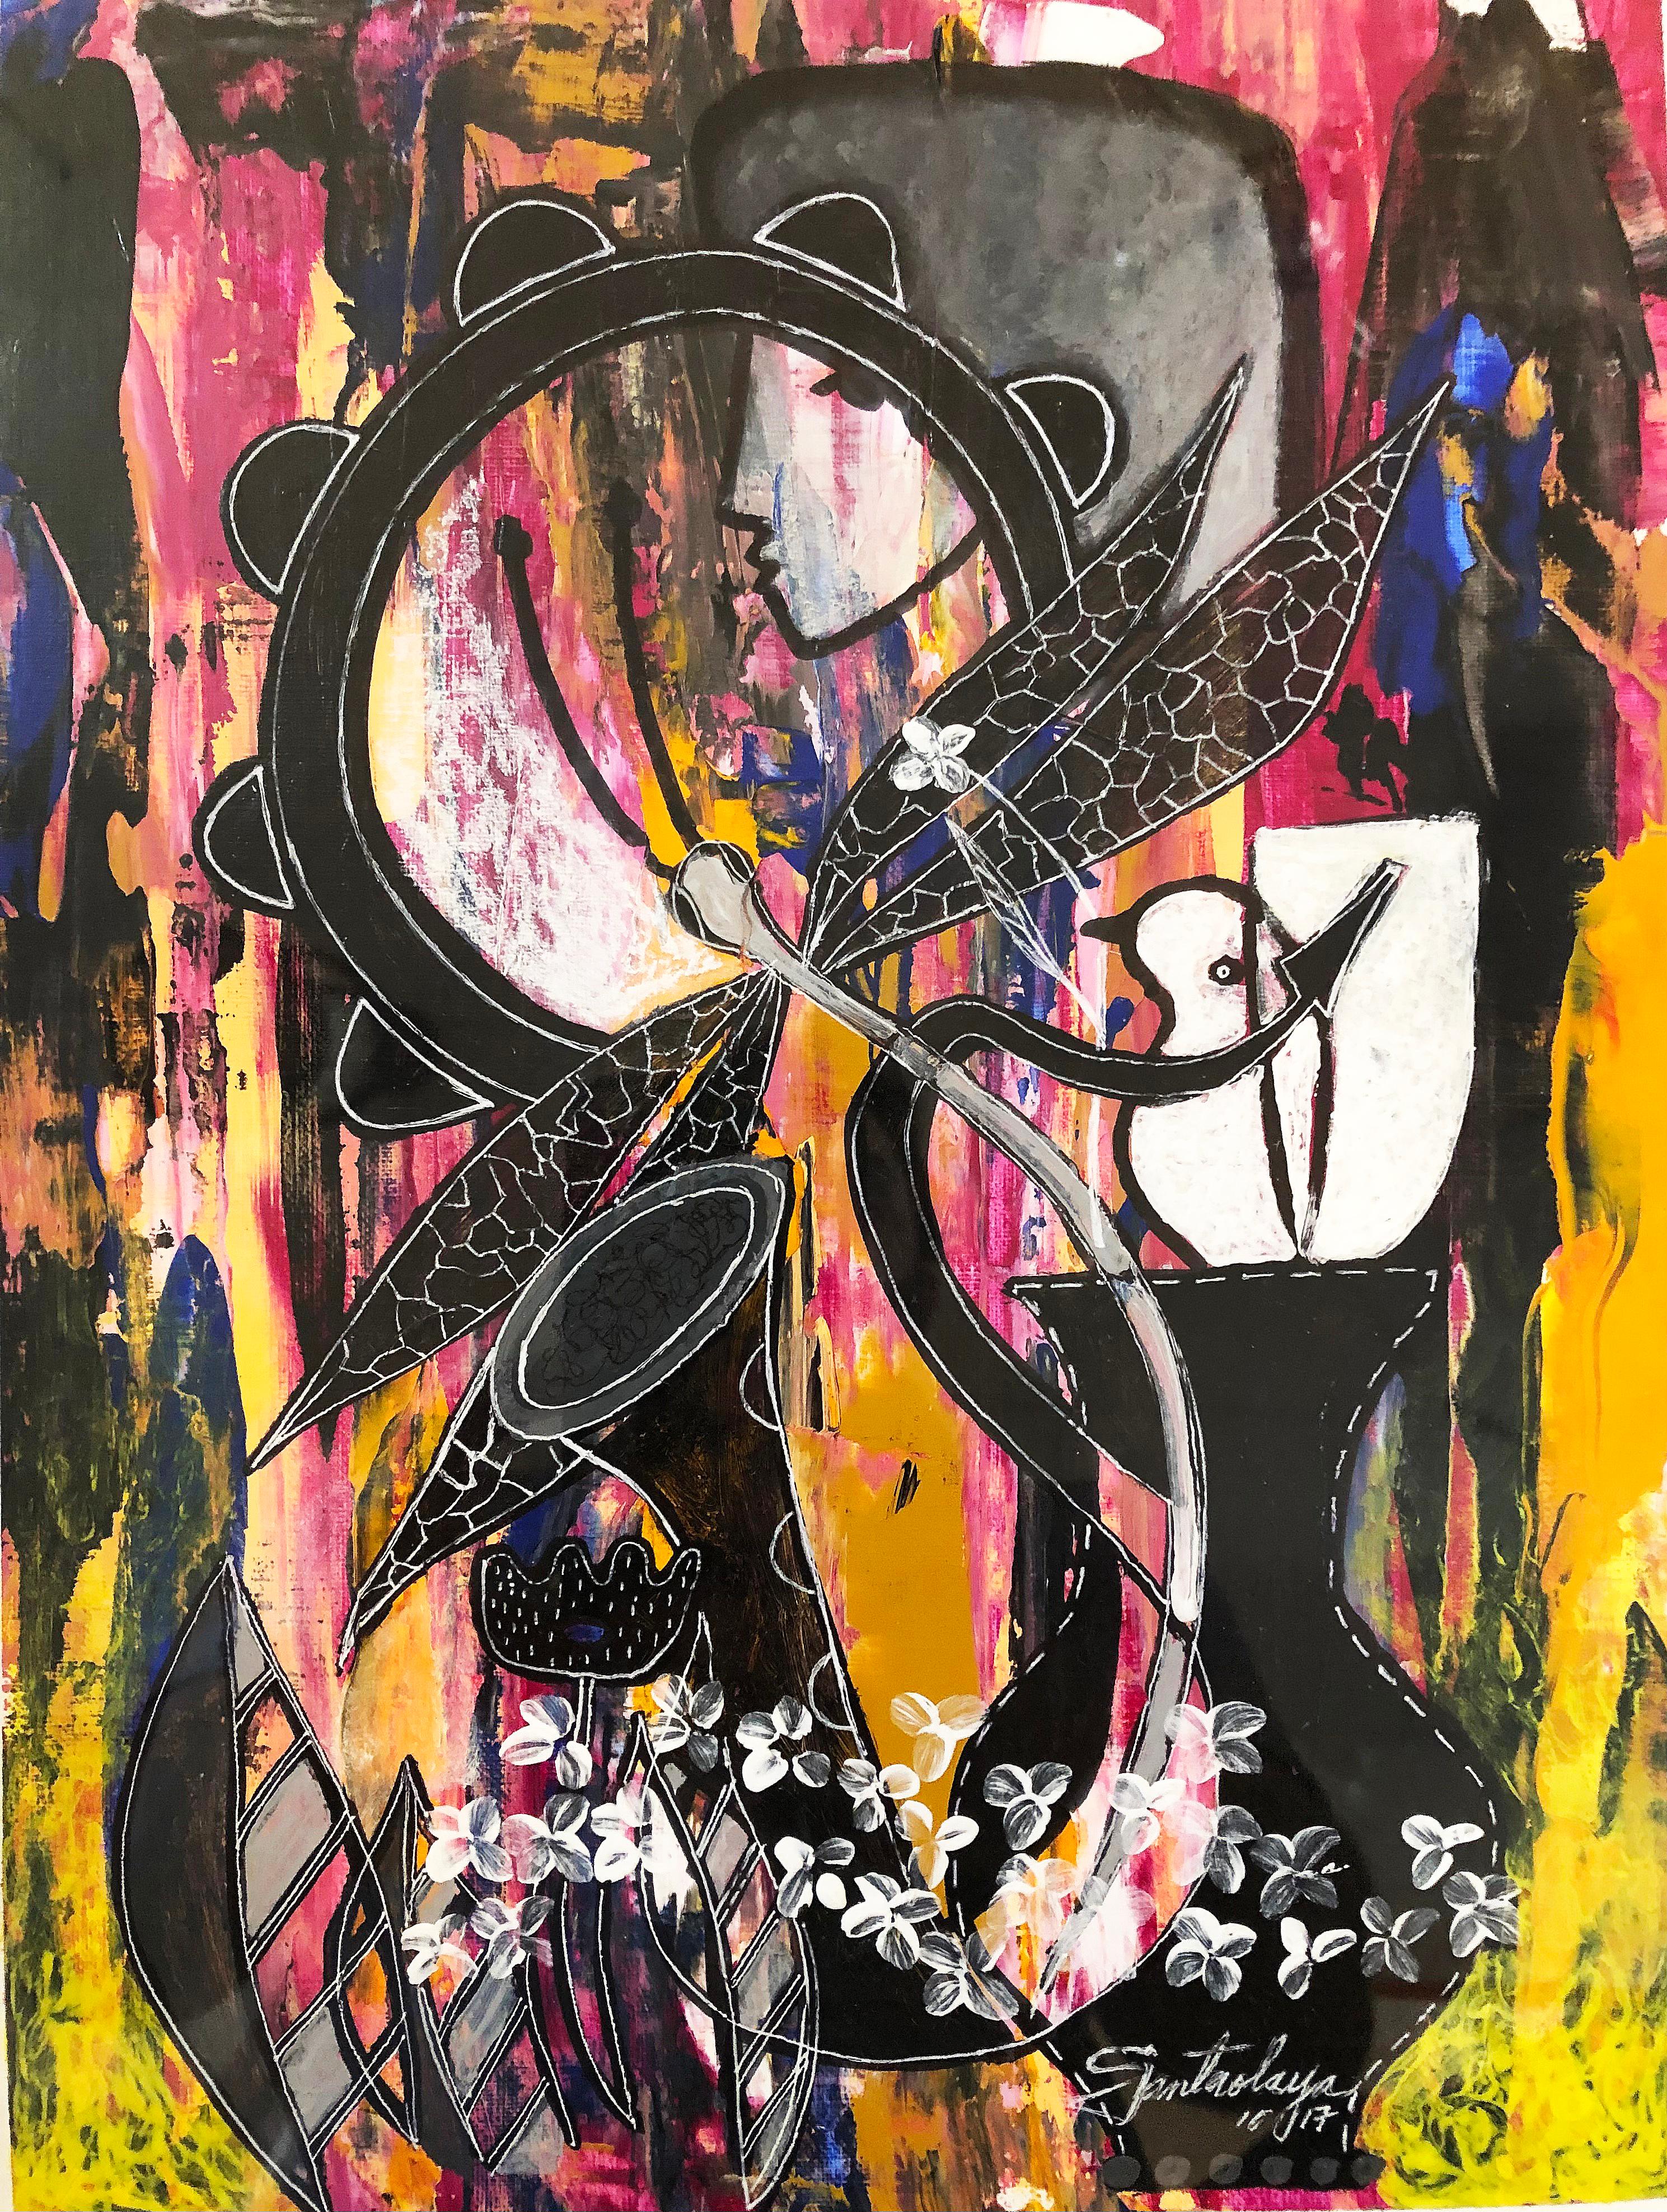 Hiremio Garcia Santaolaya abstract painting, Cuban-American Artist, 2017

Offered for sale is a figurative acrylic on paper by the Cuban-American artist Hiremio Garcia Santaolaya titled 